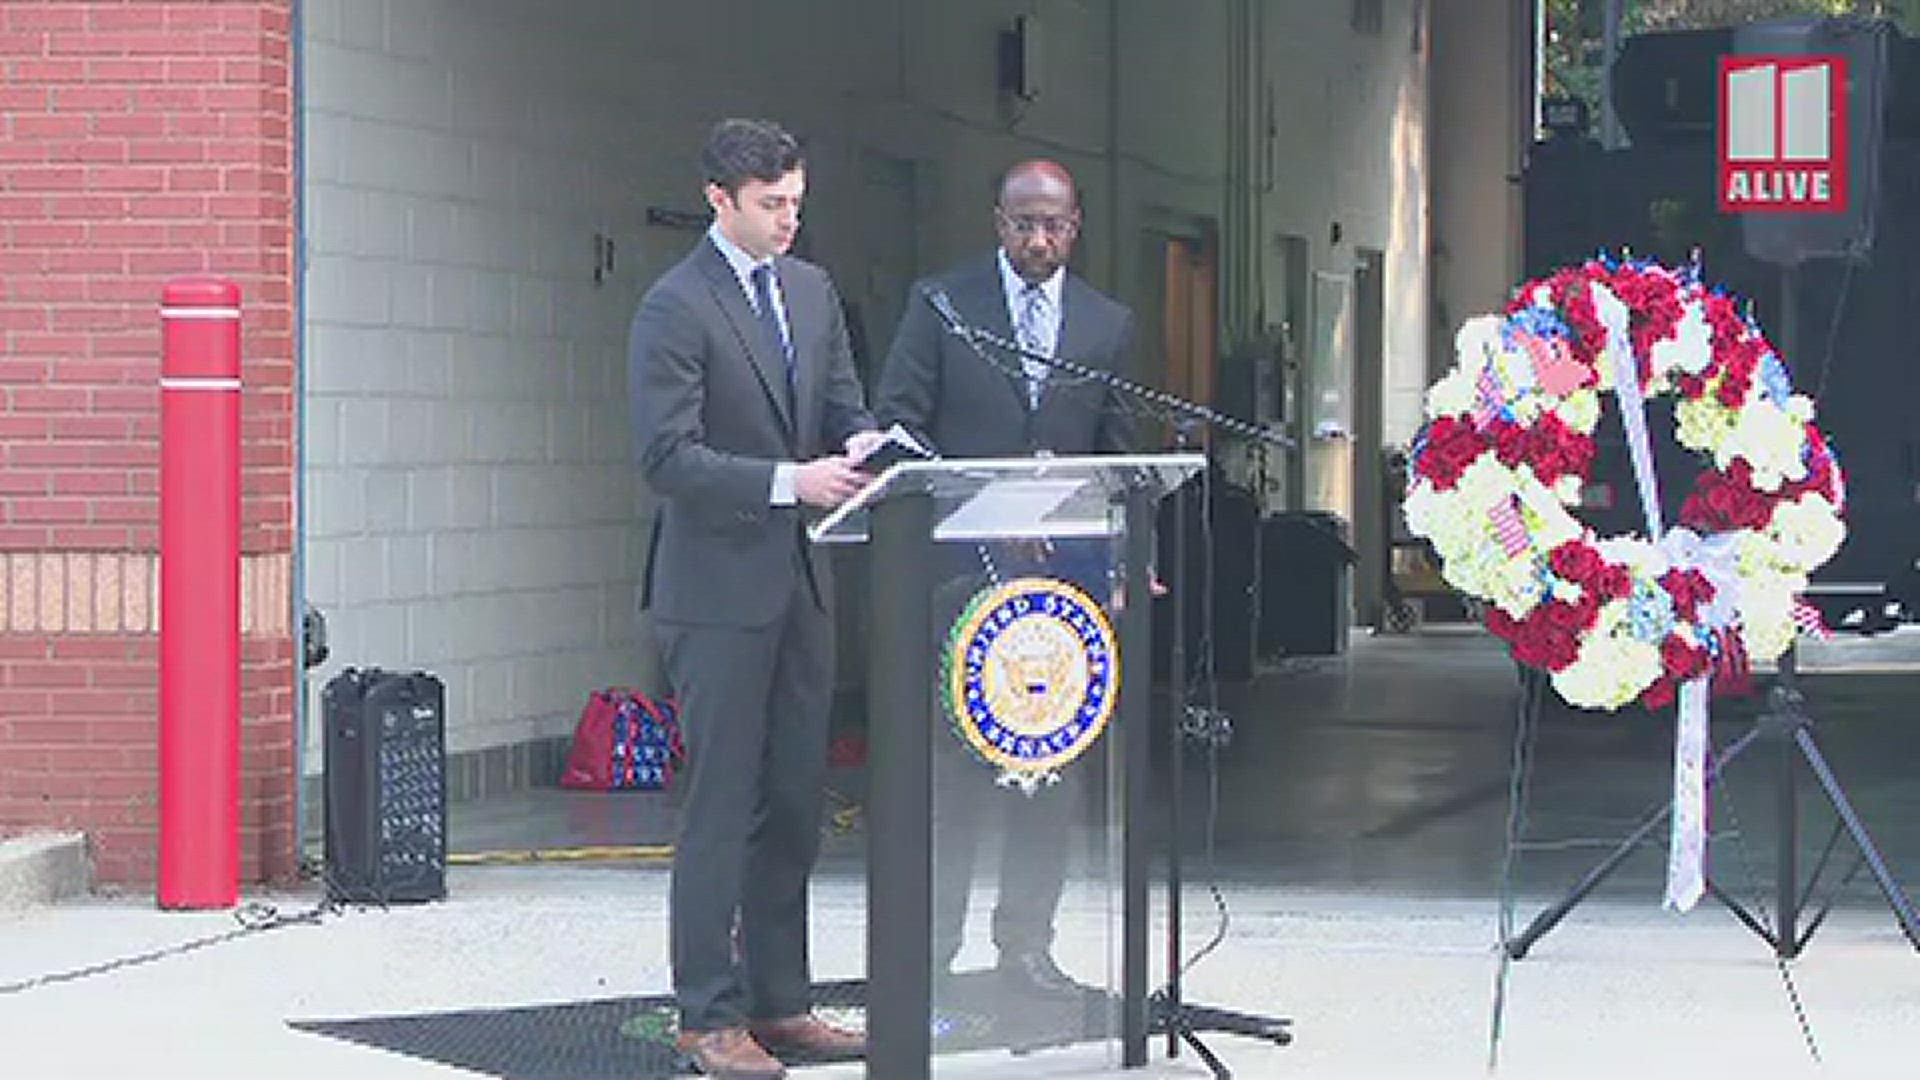 He and Sen. Rev. Raphael Warnock laid a wreath at a South Fulton firehouse in honor of the victims of 9/11.